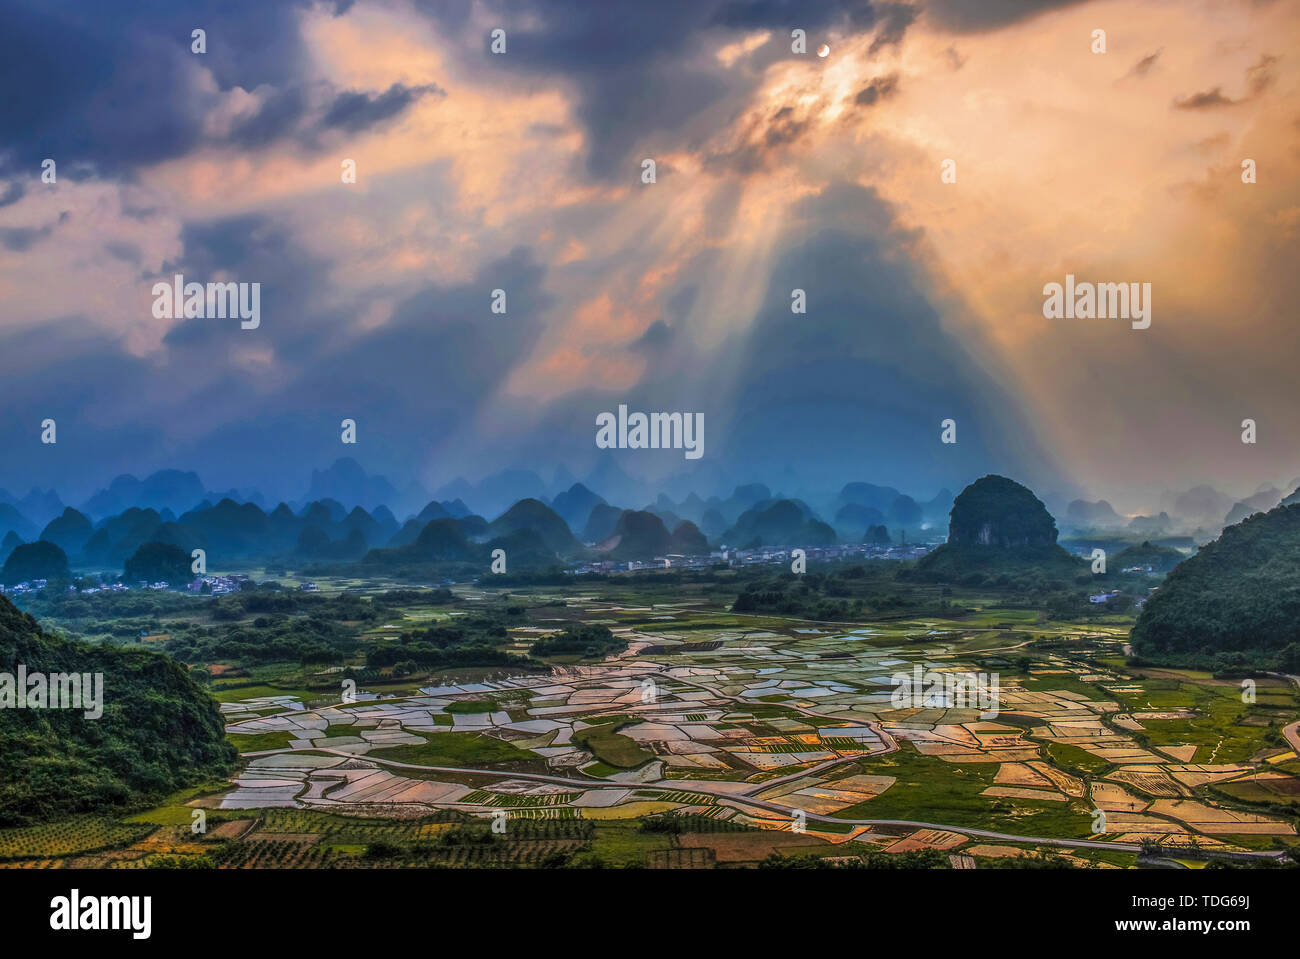 In July 2015, it was filmed in the scenic spot of Guilin City, Guangxi Zhuang Autonomous Region. In the morning, climb to the top of Xianggong to shoot beautiful scenery, look around, sunrise, sea of clouds, mountains meandering, graceful peaks, Xianggong Mountain is the best shooting place for sunrise in the Li River, every mountain, every beach of water, mountains and rivers depend on each other, strange peaks haunt. The combination of light and shadow, peak forest, clouds and fog, river water and color glow at different times, a charming landscape painting. Stock Photo